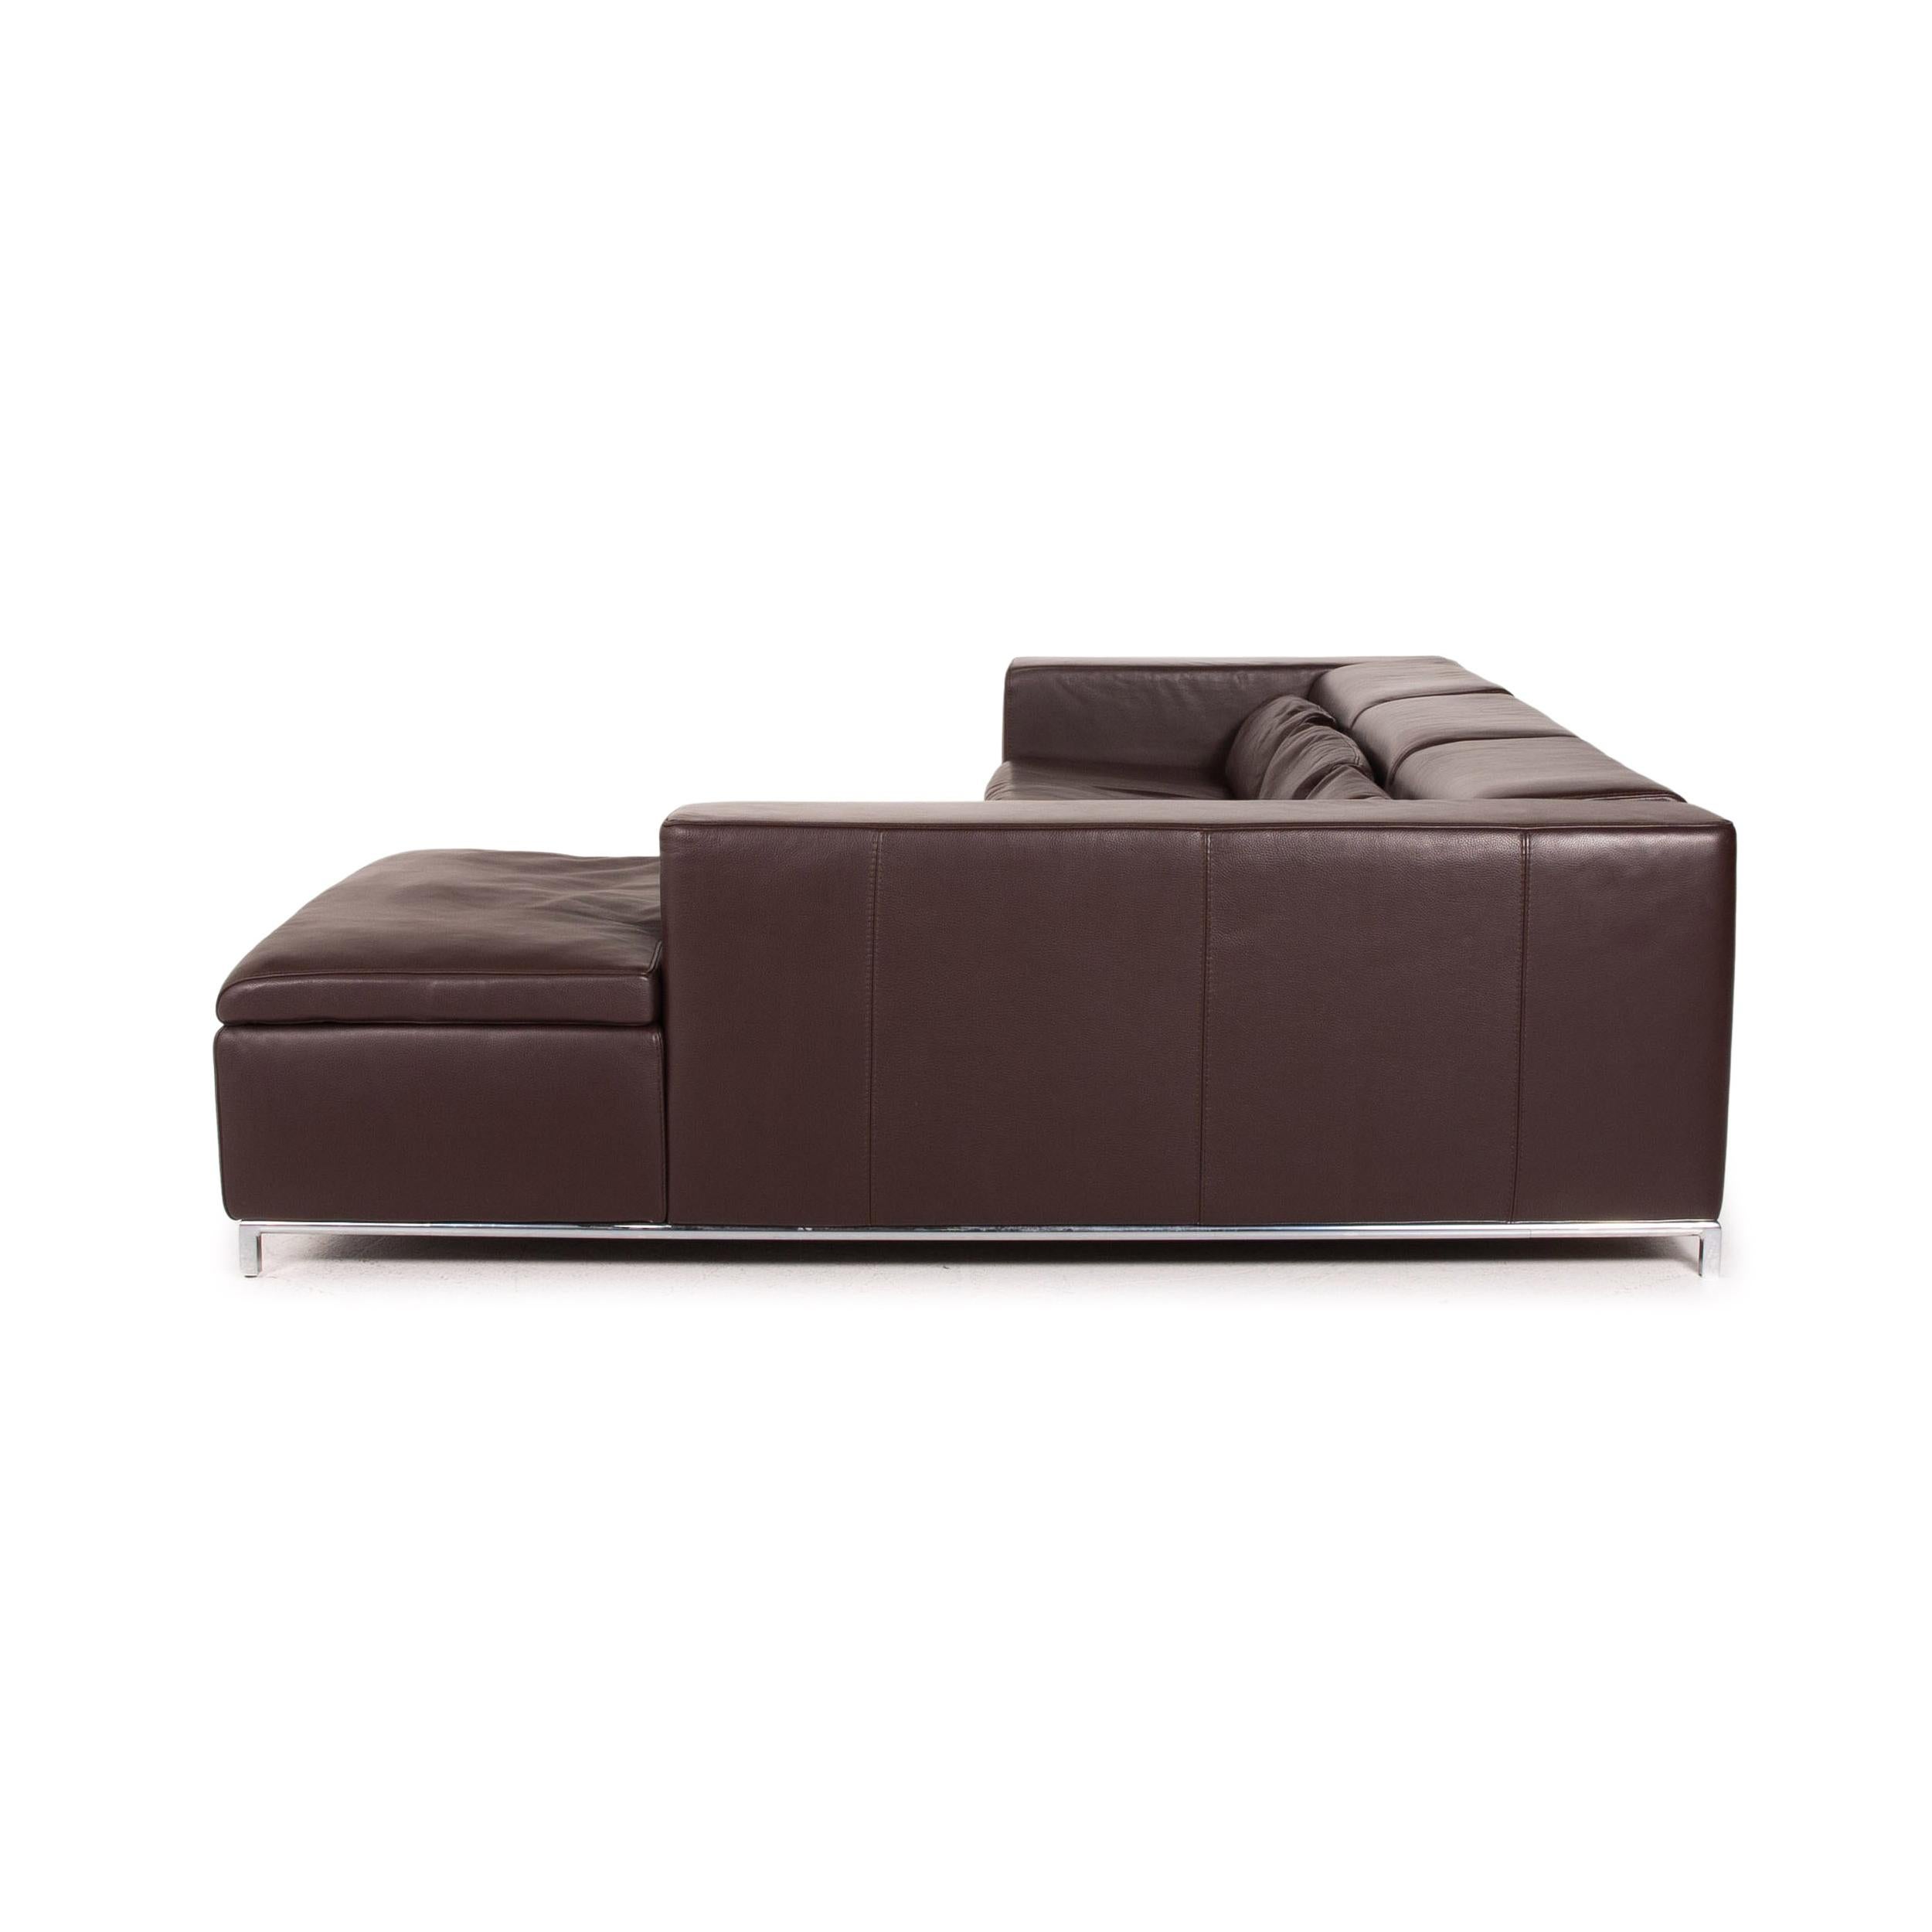 Who's Perfect Leather Corner Sofa Brown Dark Brown Sofa Couch 7